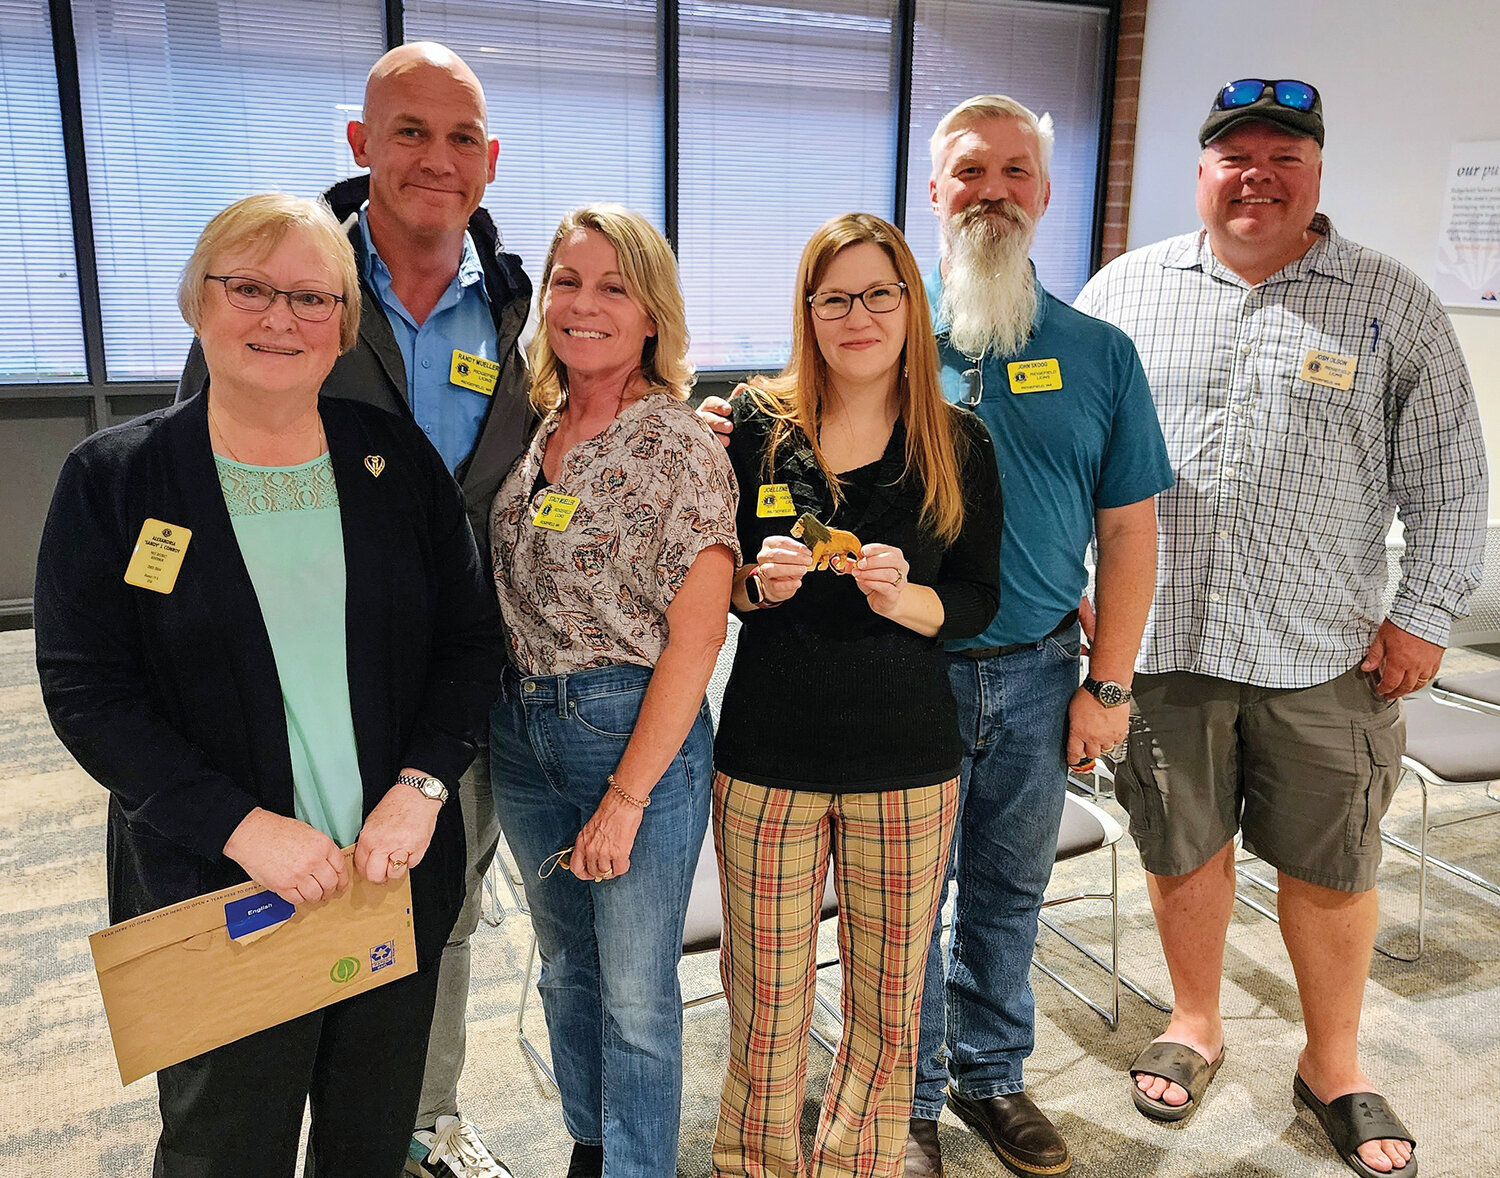 Sandy Conroy, far left, inducted four new individuals into the Ridgefield Lions on Sept. 28. They are, left to right: Randy Mueller; Stacy Mueller; Joellene Skoog; and John Skoog. At far right is Ridgefield Lions President John Olson.